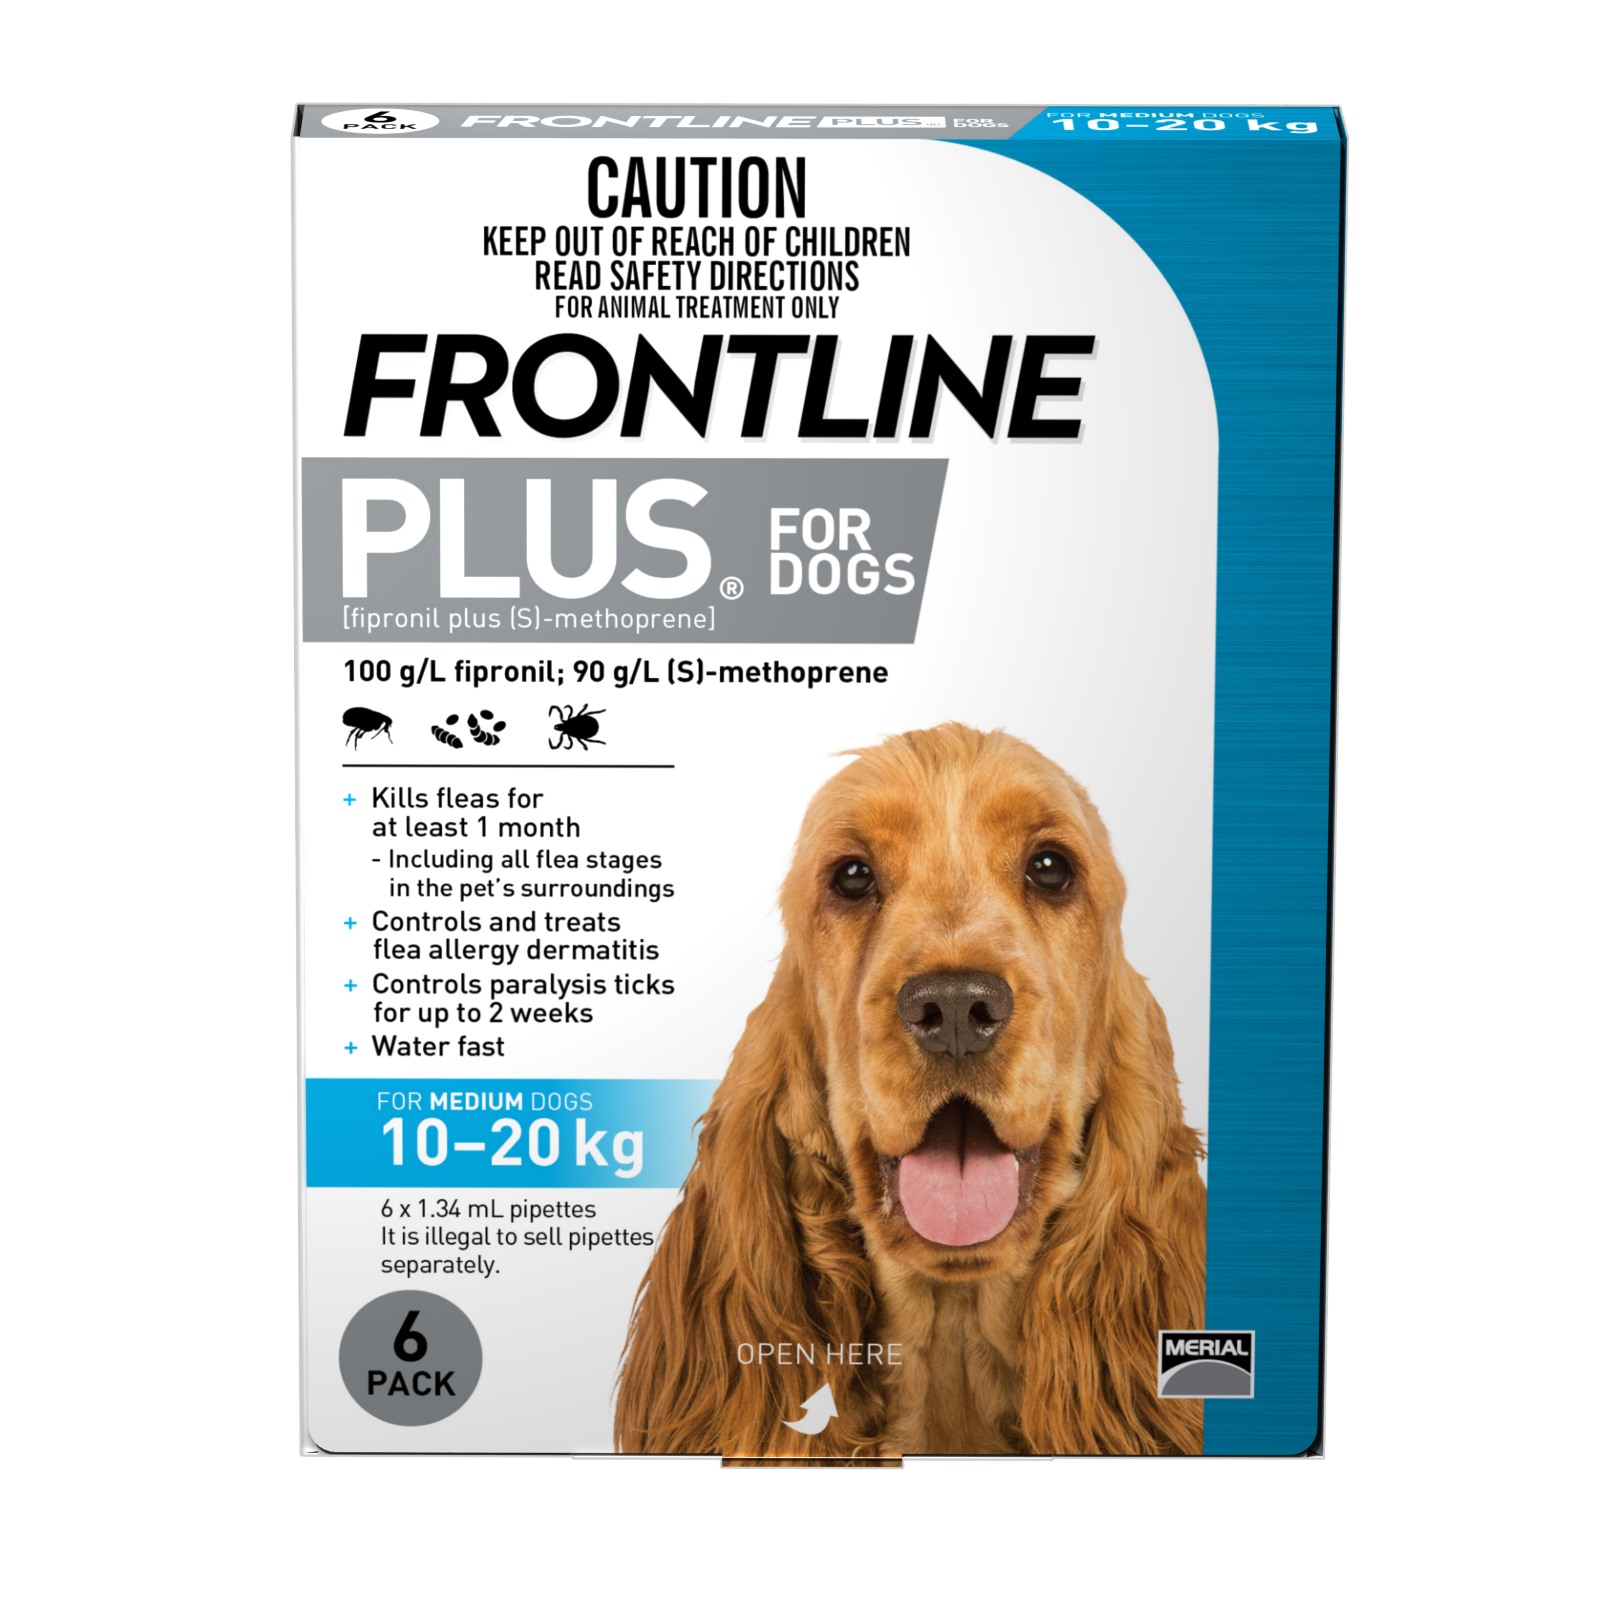 Frontline Plus Flea & Tick Protection for Dogs - 6 Pack image 1